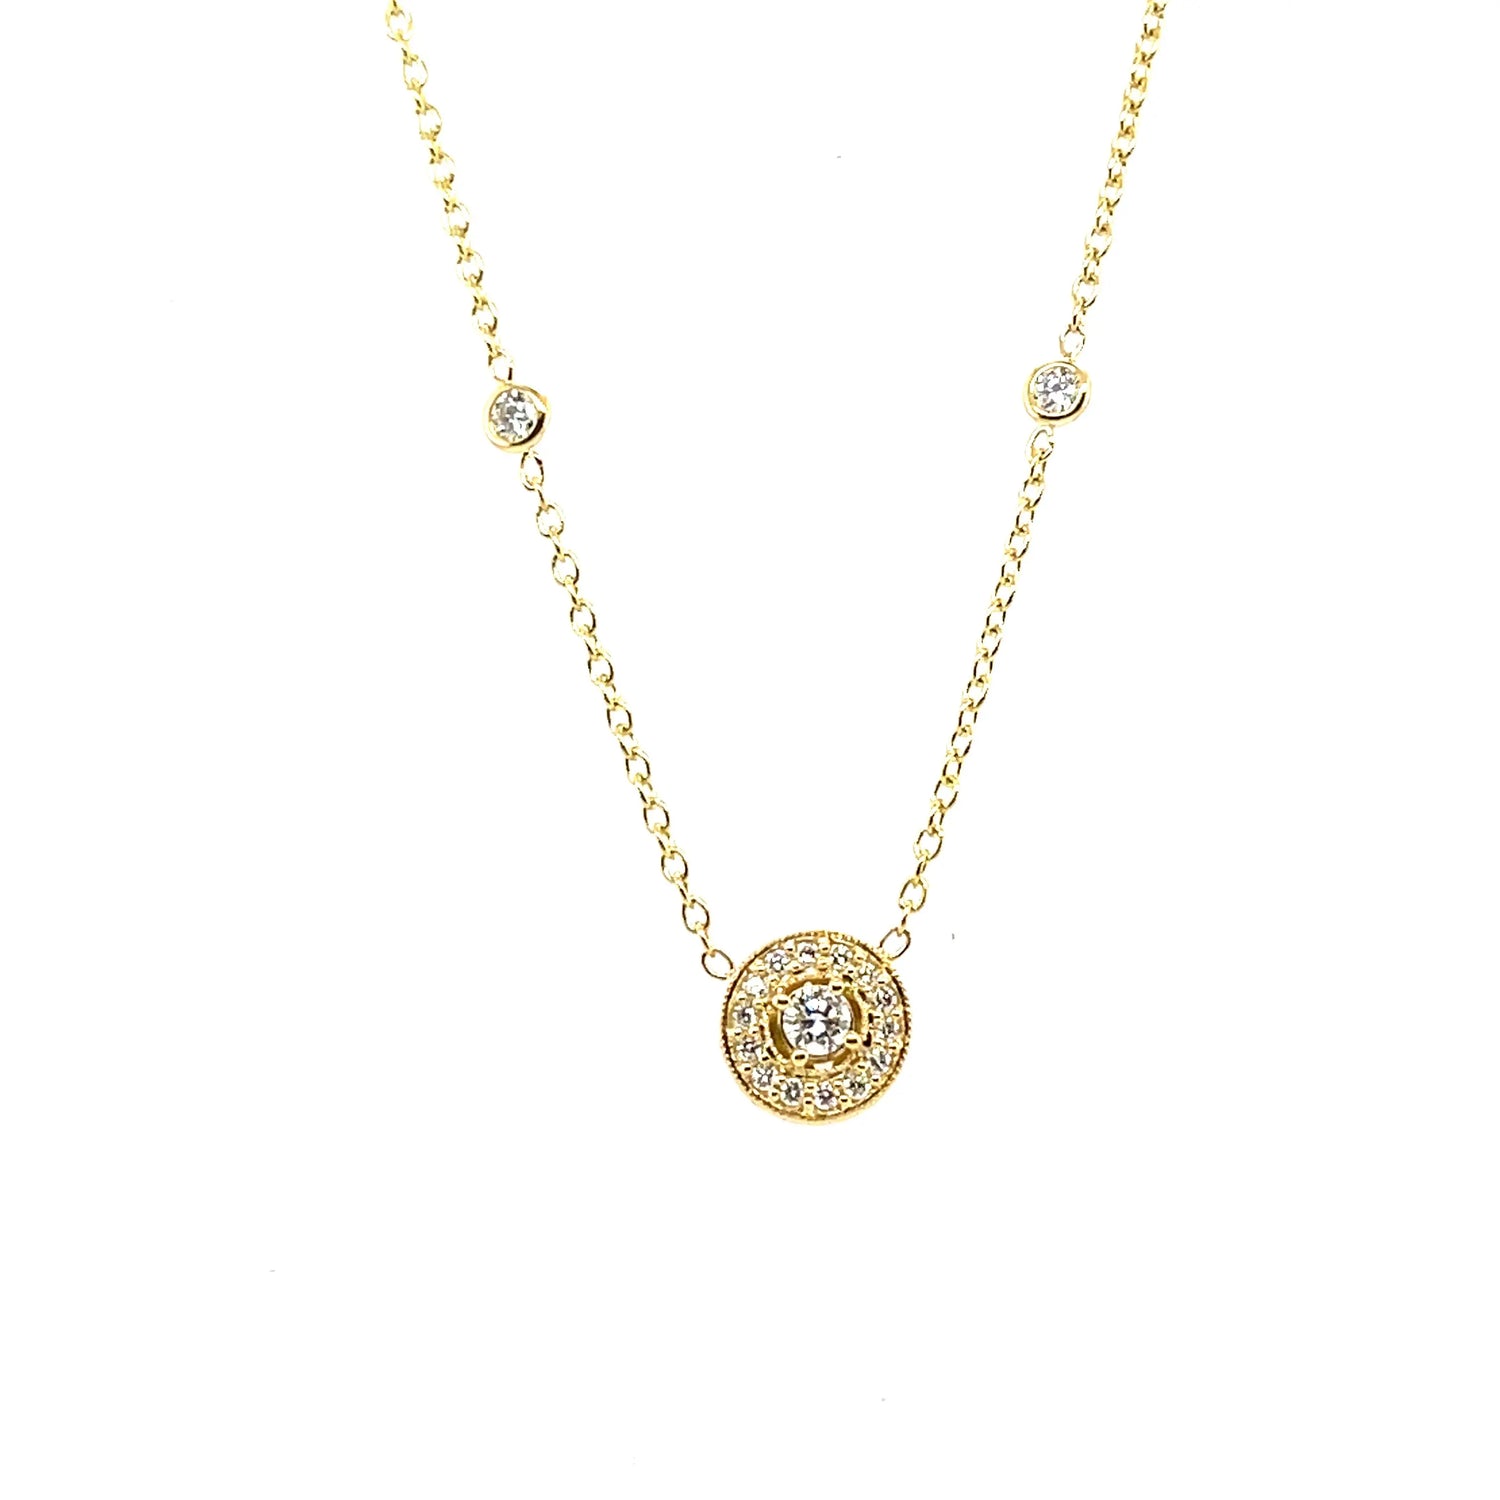 18K yellow gold medium Pave Round Diamond .36ct Engraved Pendant  Length: 18 inches  Designed by Penny Preville